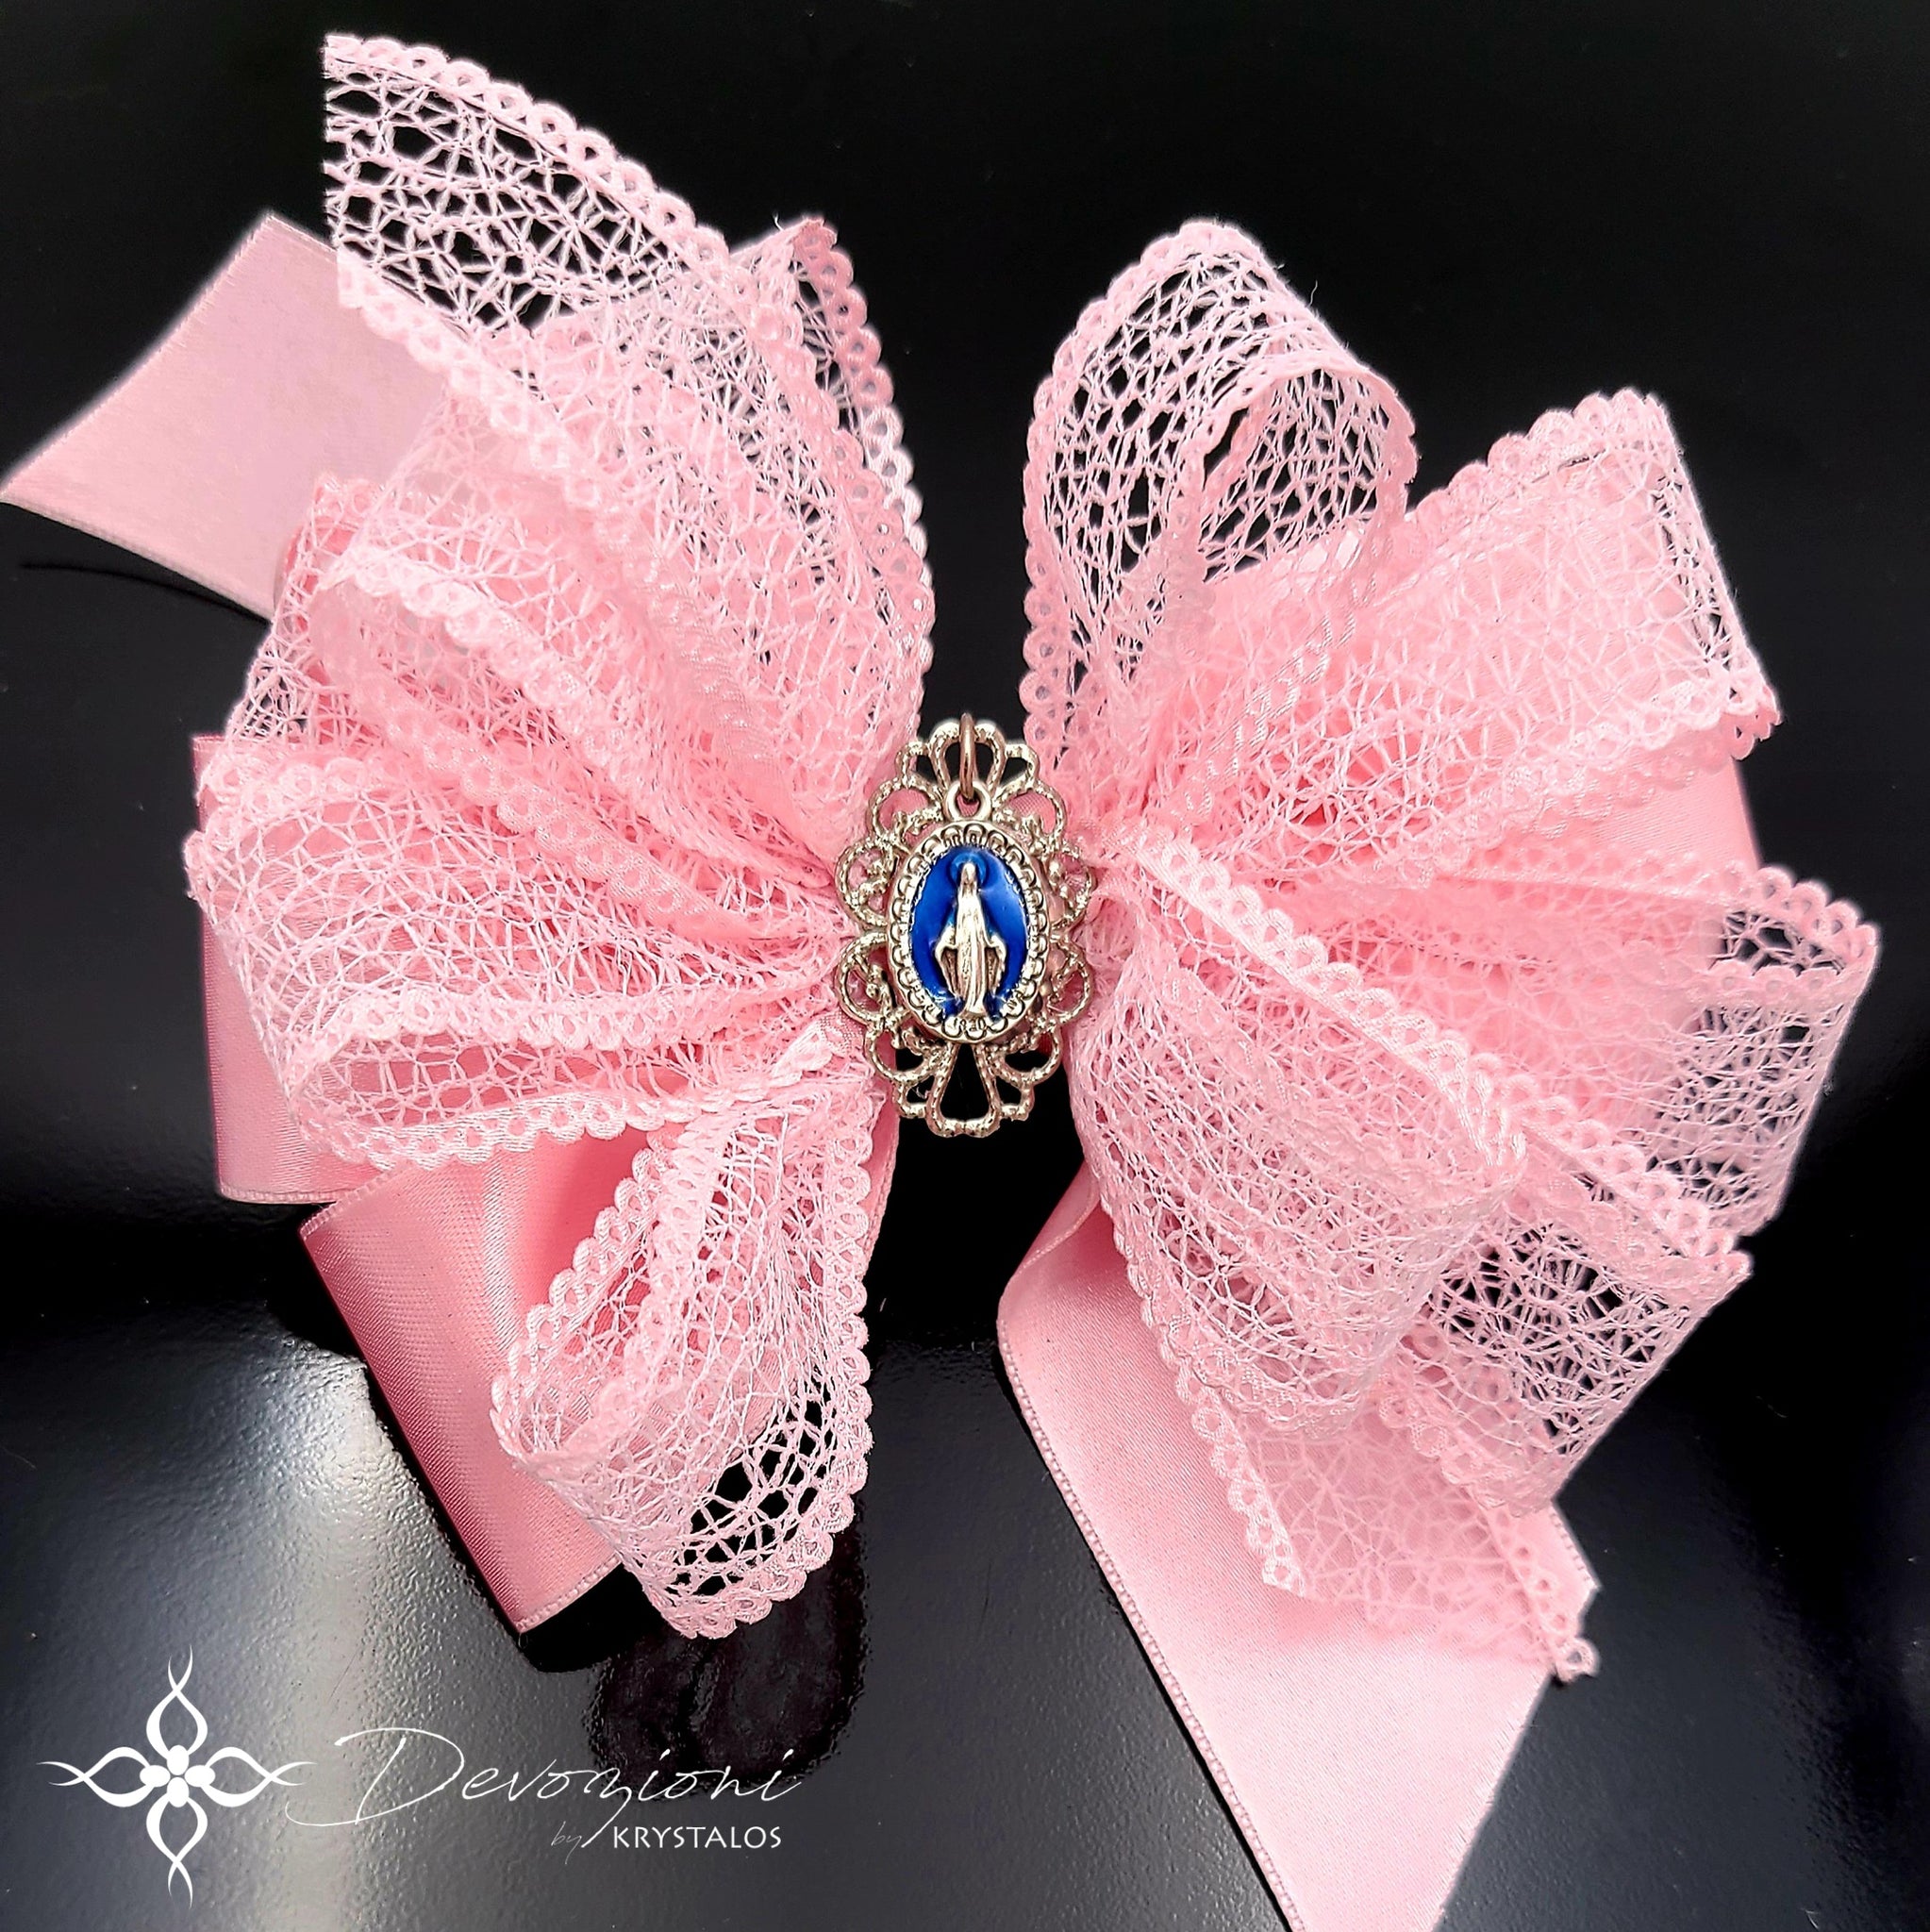 Virgin Mary (Miraculous Medal) Bow for Girls in Pink Satin and Lace - Floreli + Devozioni